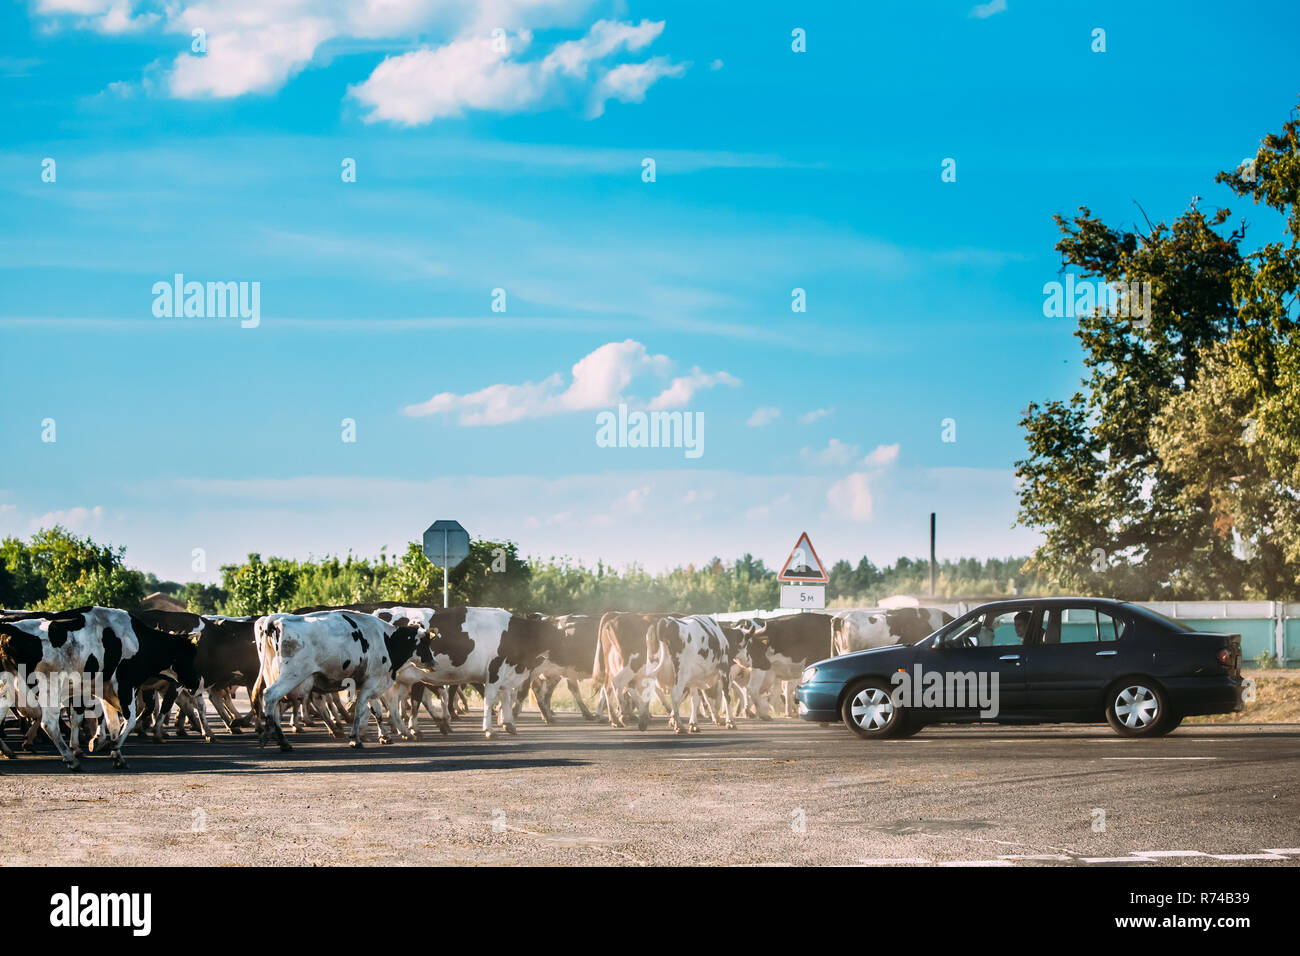 Herd Of Cattle Cows Dangerous Crossing Road In Countryside  Opposite Cars. Cattle Crossing On Dusty Road. Stock Photo